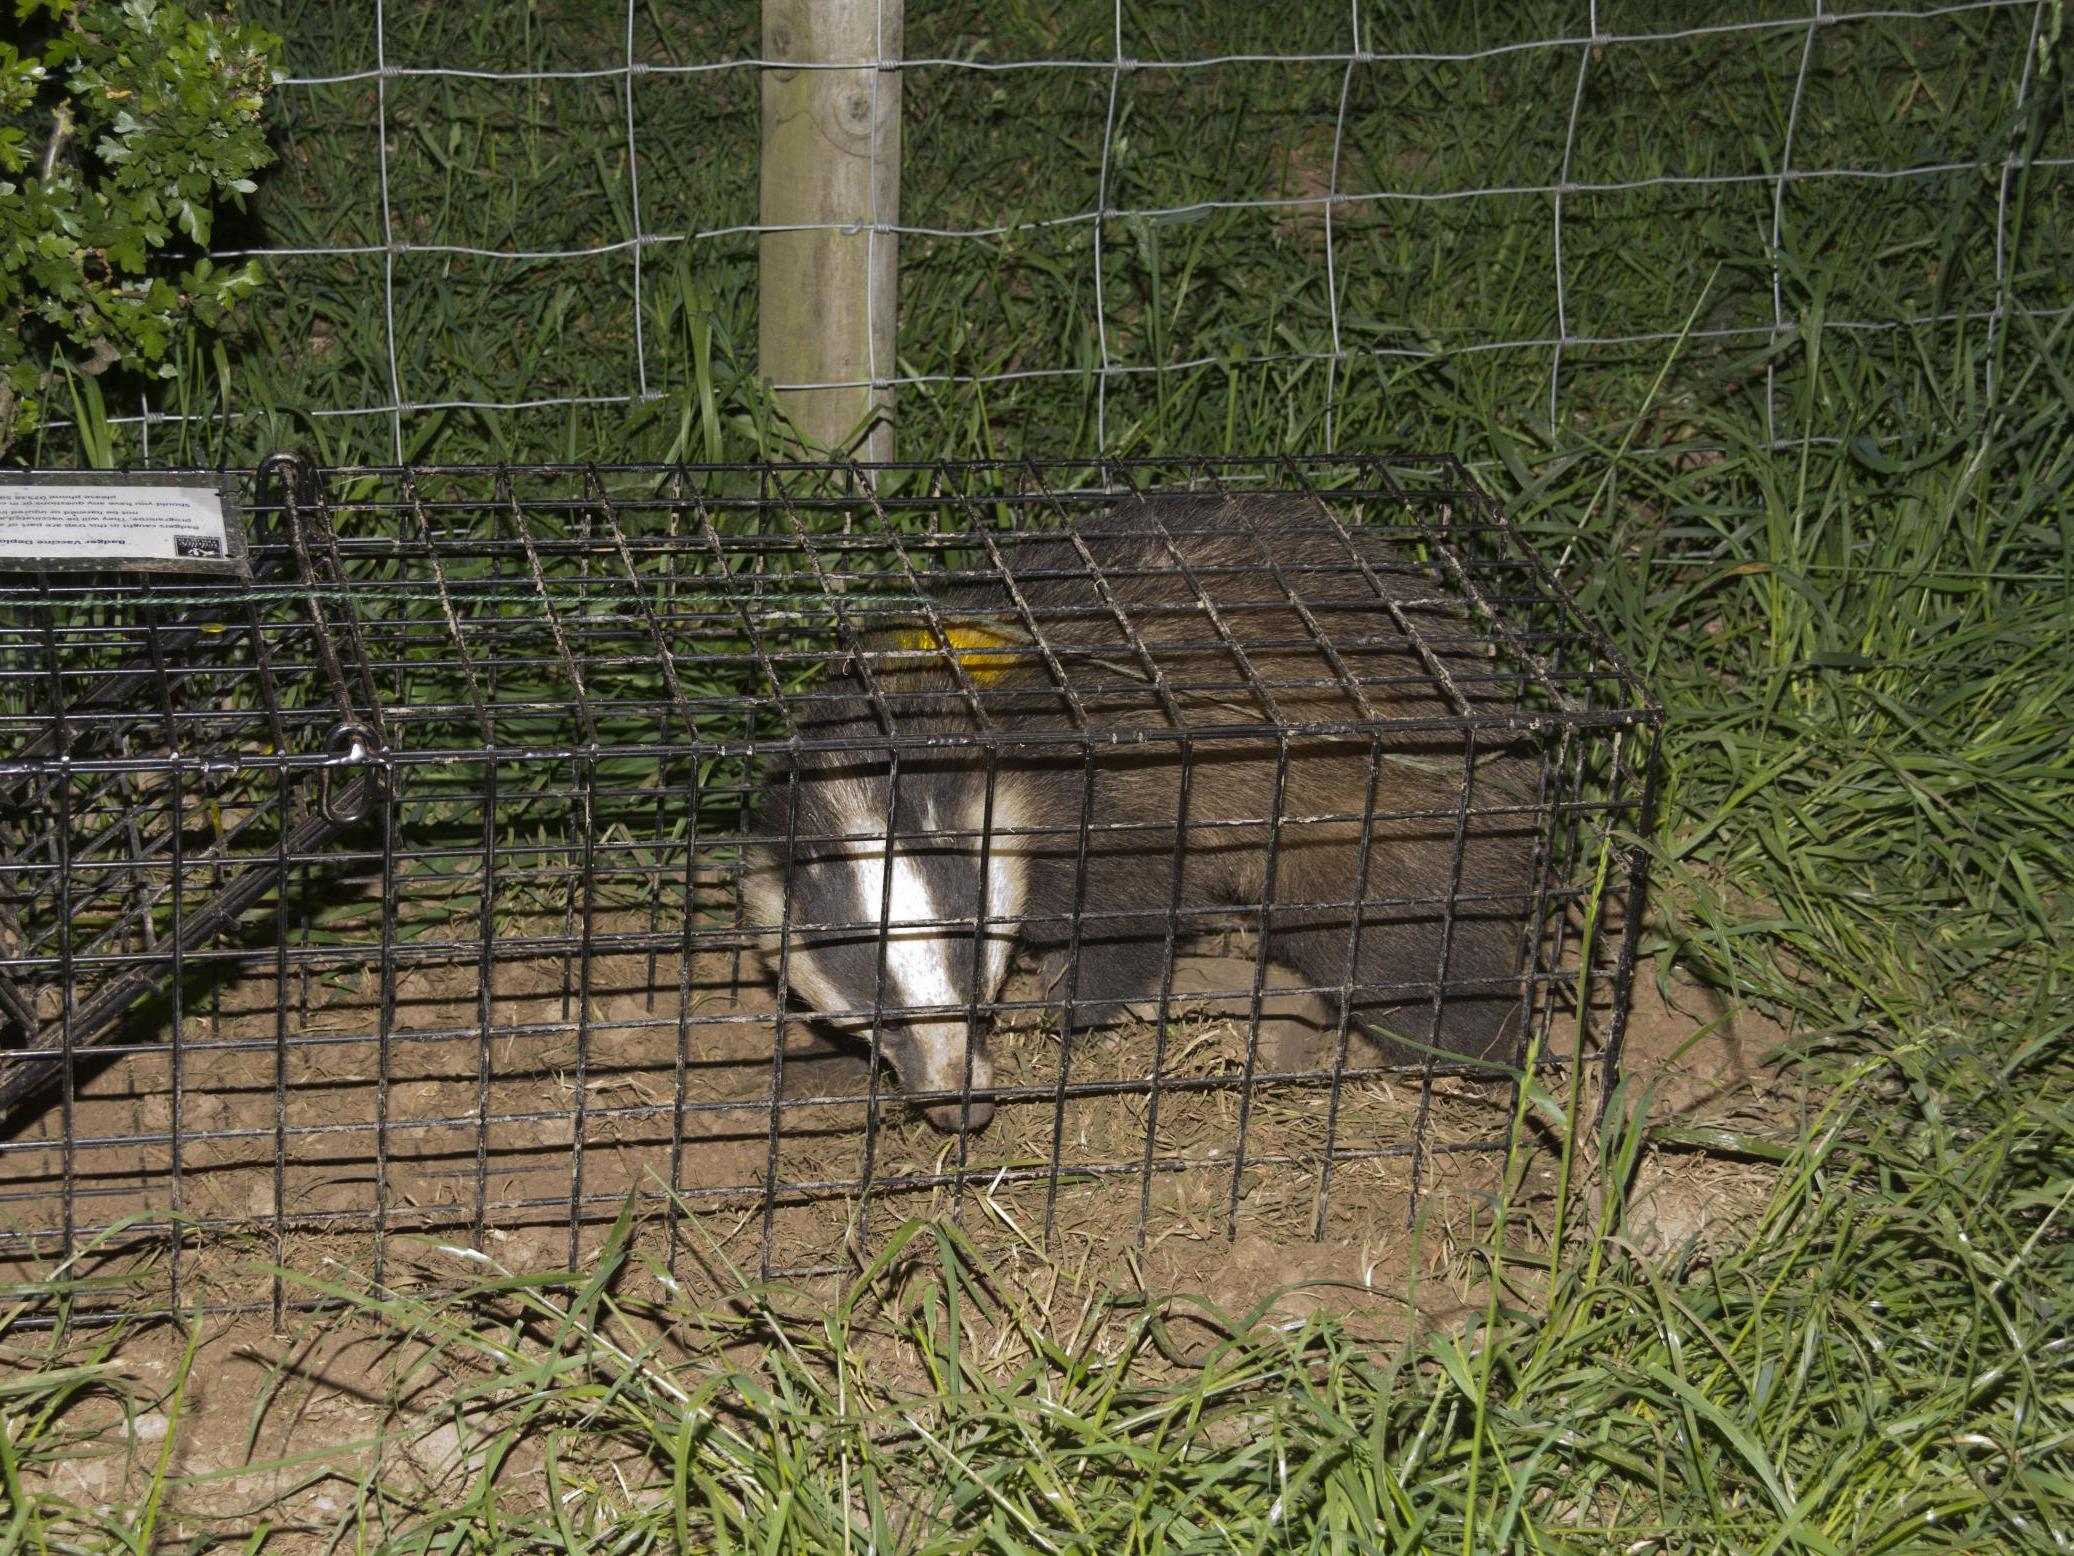 Once in a cage, an animal has no access to water, and the ground is too hard to dig for food